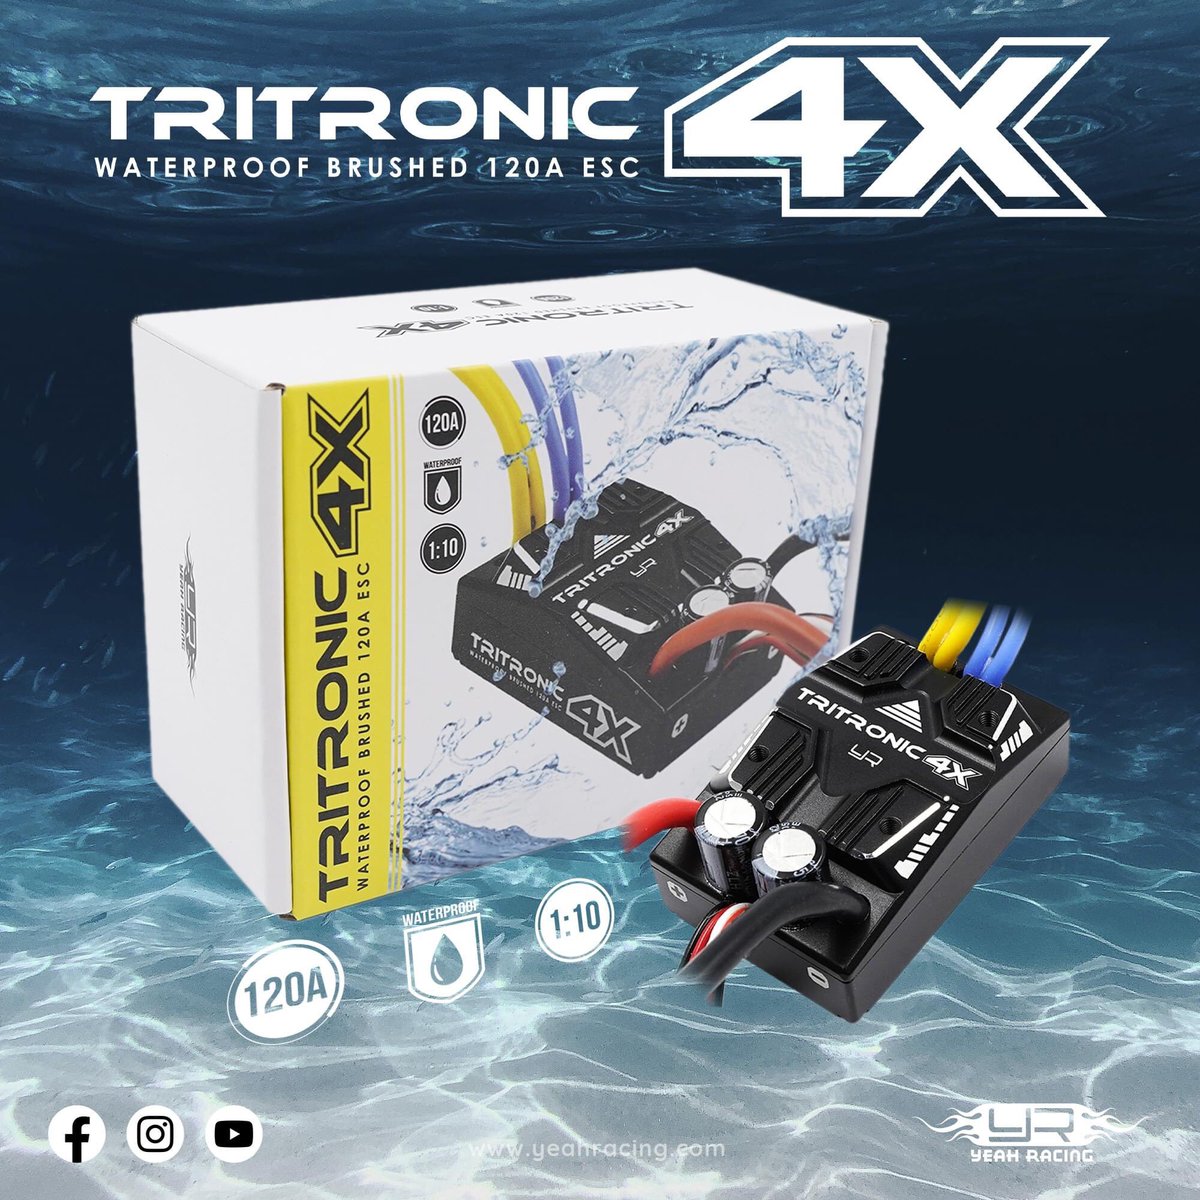 Yeah Racing Tritronic 4X Waterproof Brushed 120A ESC is now available at rcMart!!! 

>> Get Yours <<
rcmart.com/00108456

>> Learn More <<
rcmart.com/Tritronic-4X-W…

#rcMart
#YeahRacing